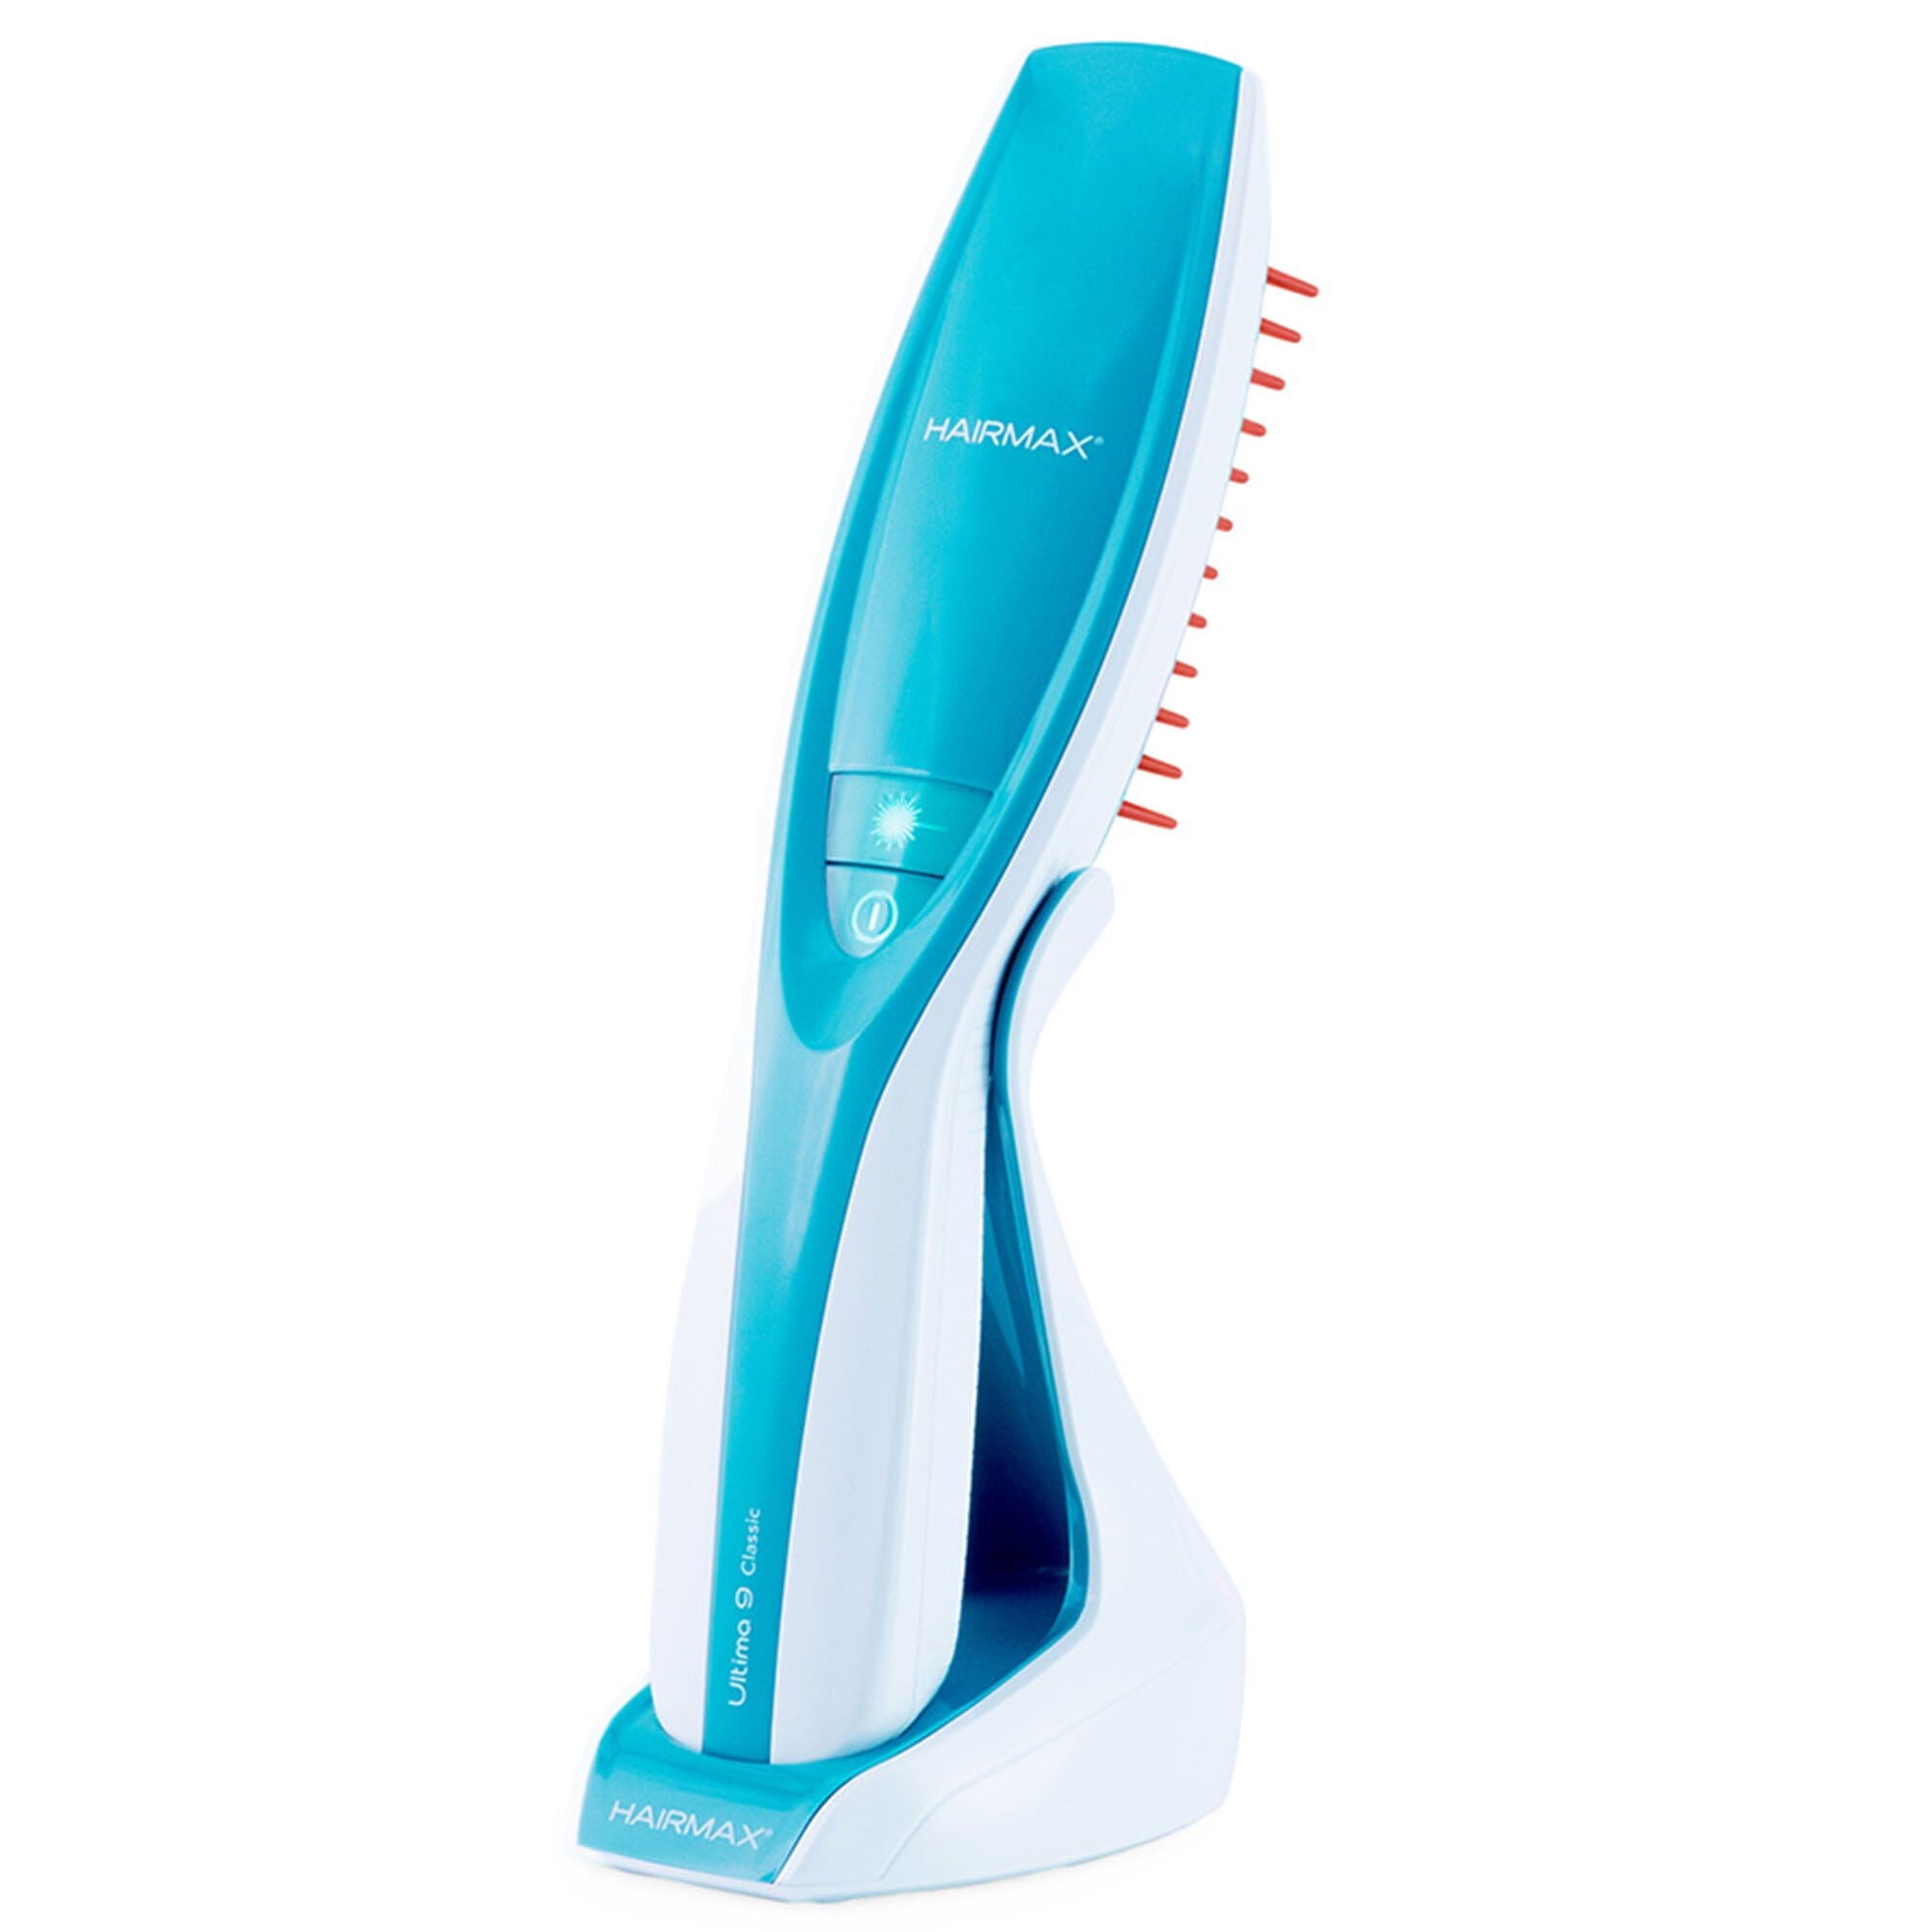 Hairmax Laser Comb Ultima 9 Classic Hairmax Shop at Exclusive Beauty Club